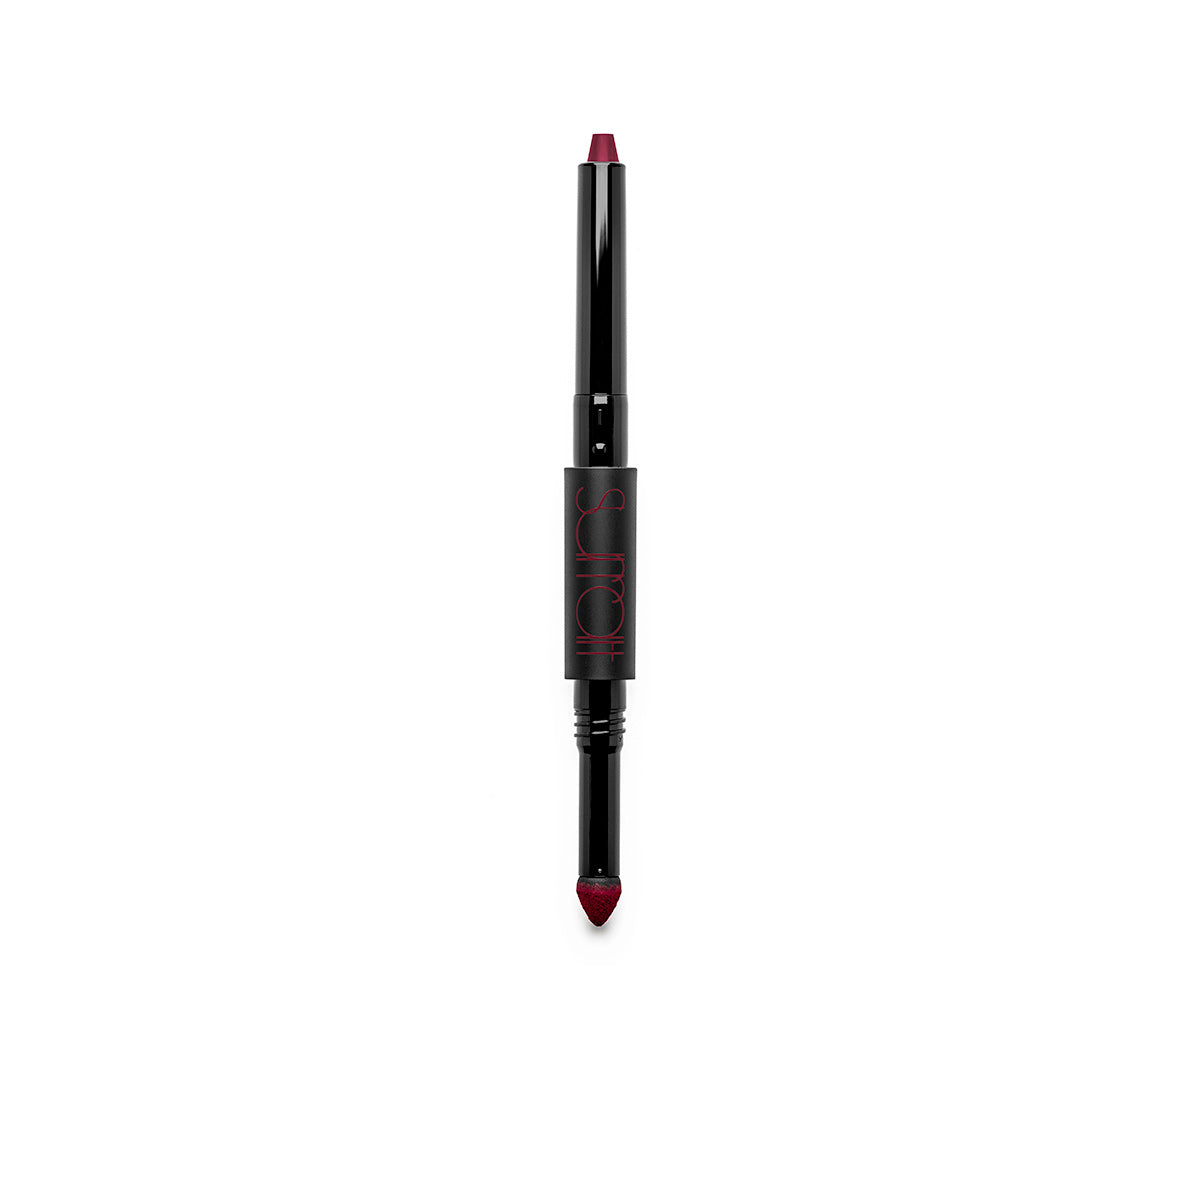 BONNE - TRUE RED - dual-ended lip baton with creamy lipstick pencil in true red and matching mattifying pigment lip powder in true red shade